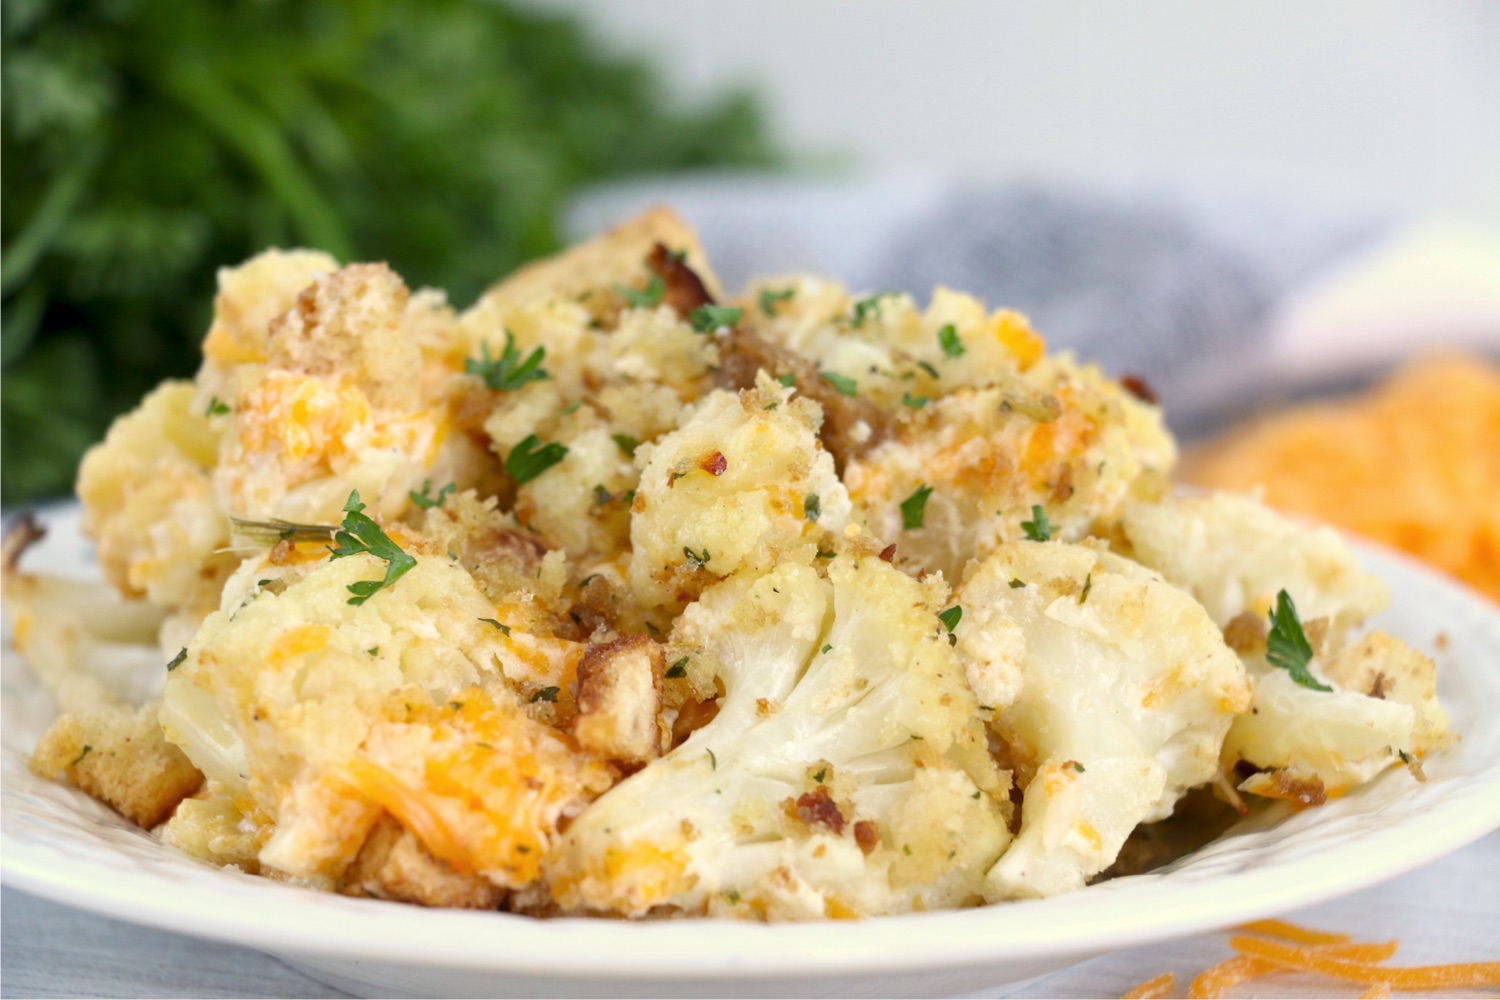 plate of cauliflower topped with cheese and parsley